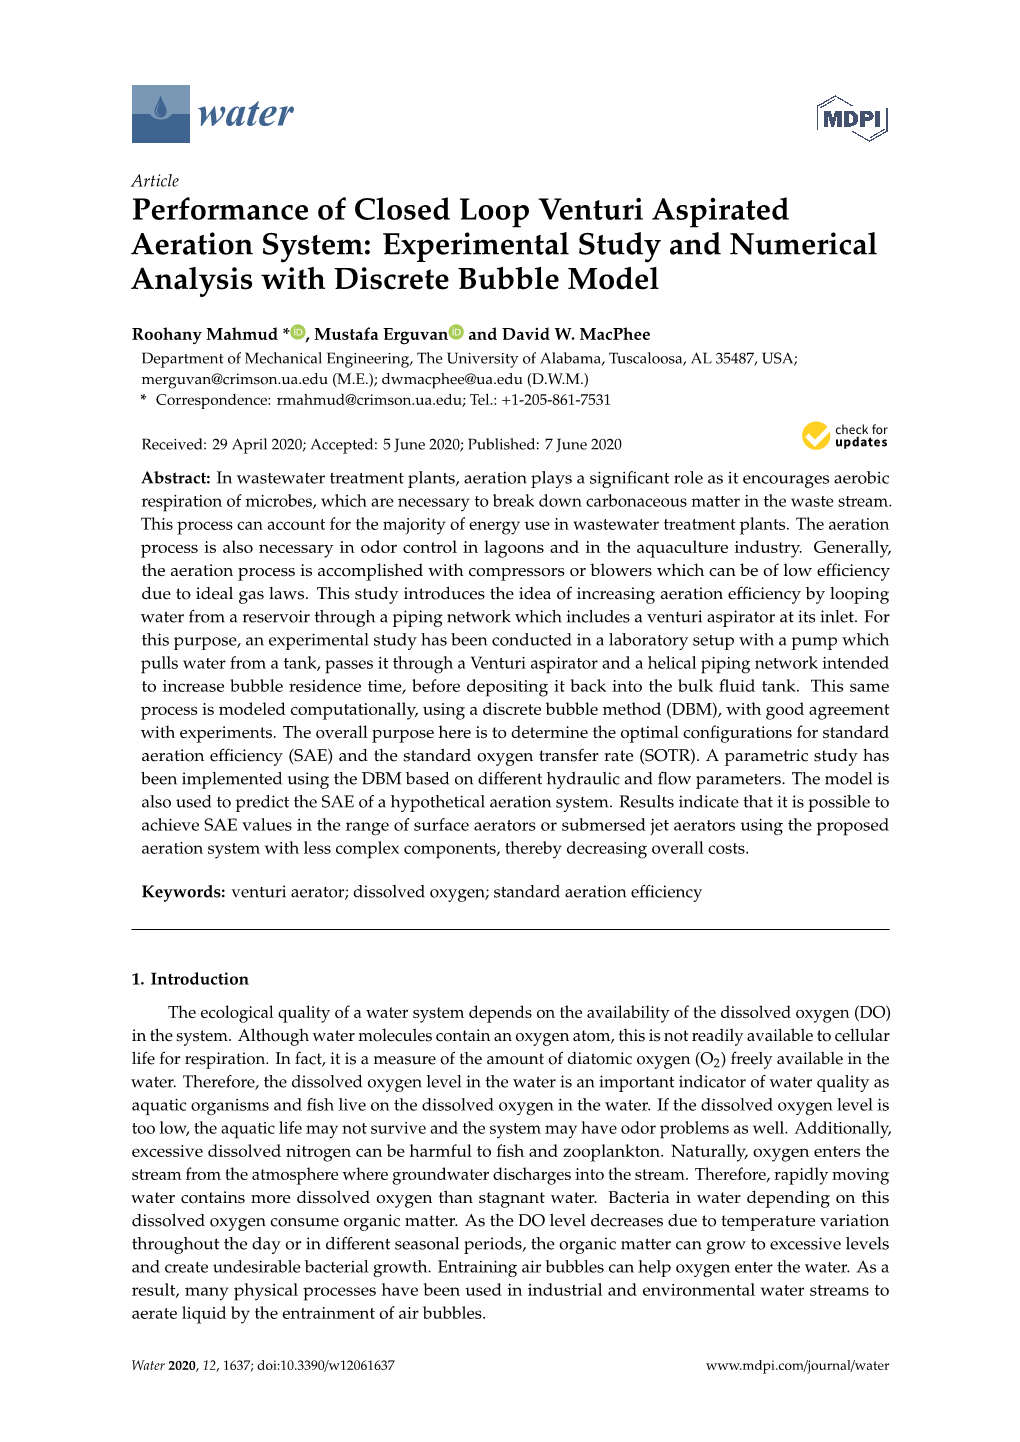 Performance of Closed Loop Venturi Aspirated Aeration System: Experimental Study and Numerical Analysis with Discrete Bubble Model